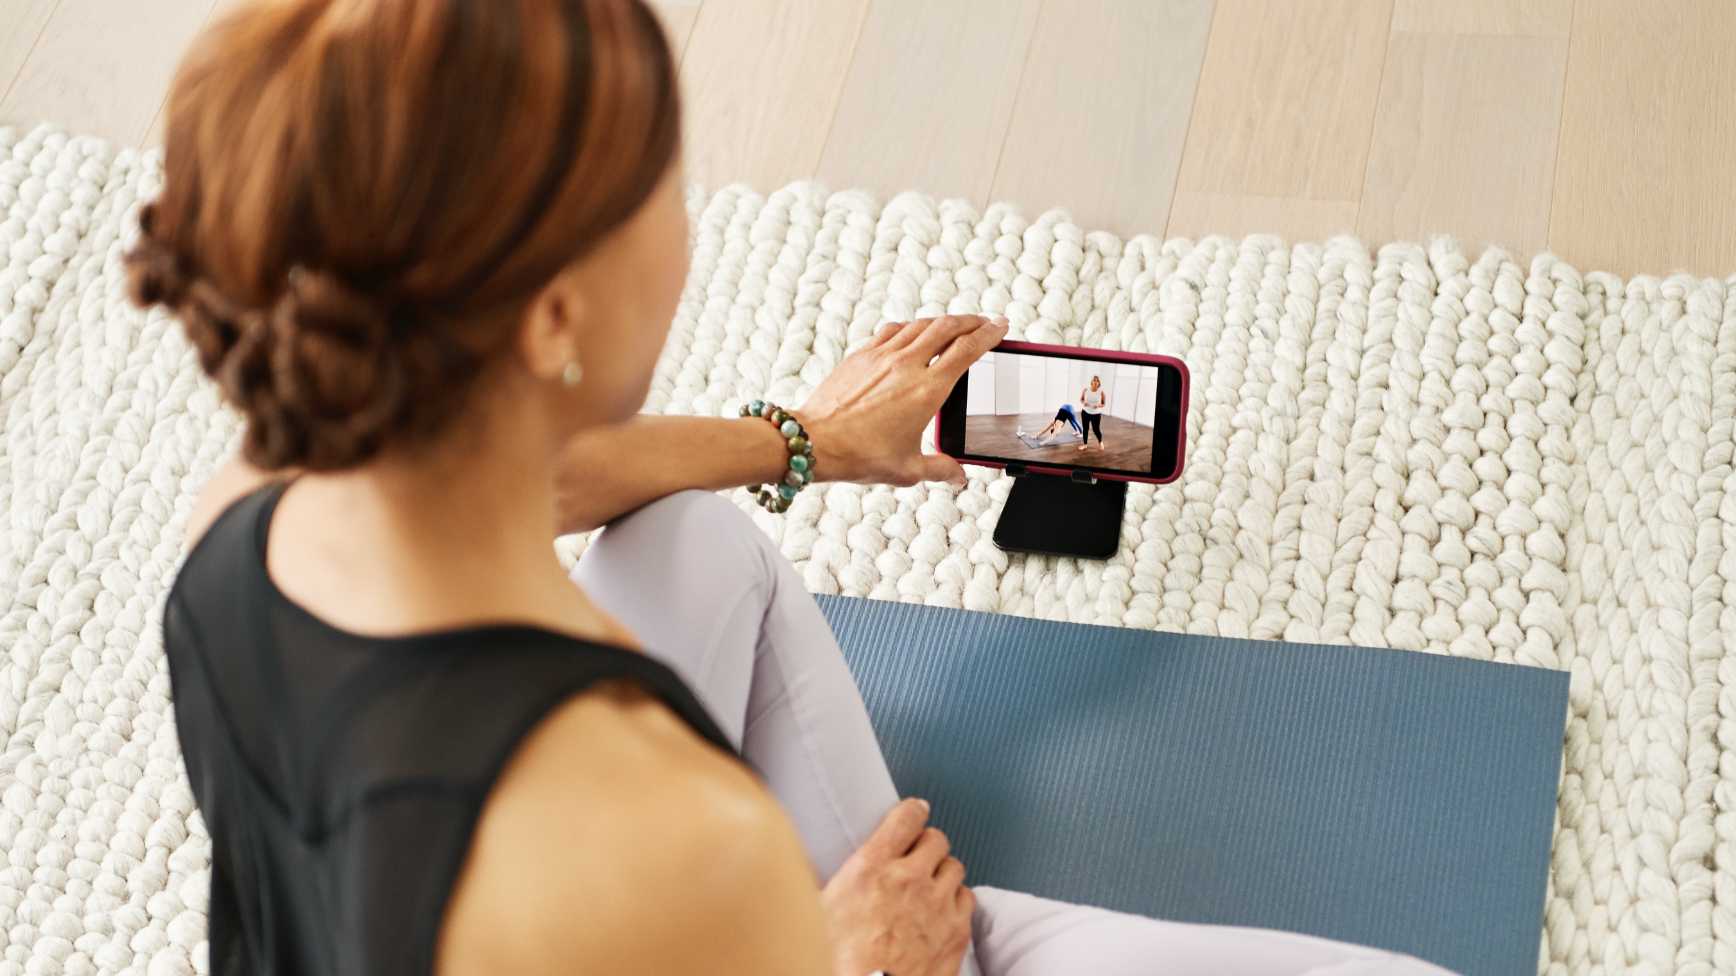 Woman in living room sitting on yoga mat, watching a workout class on her phone.